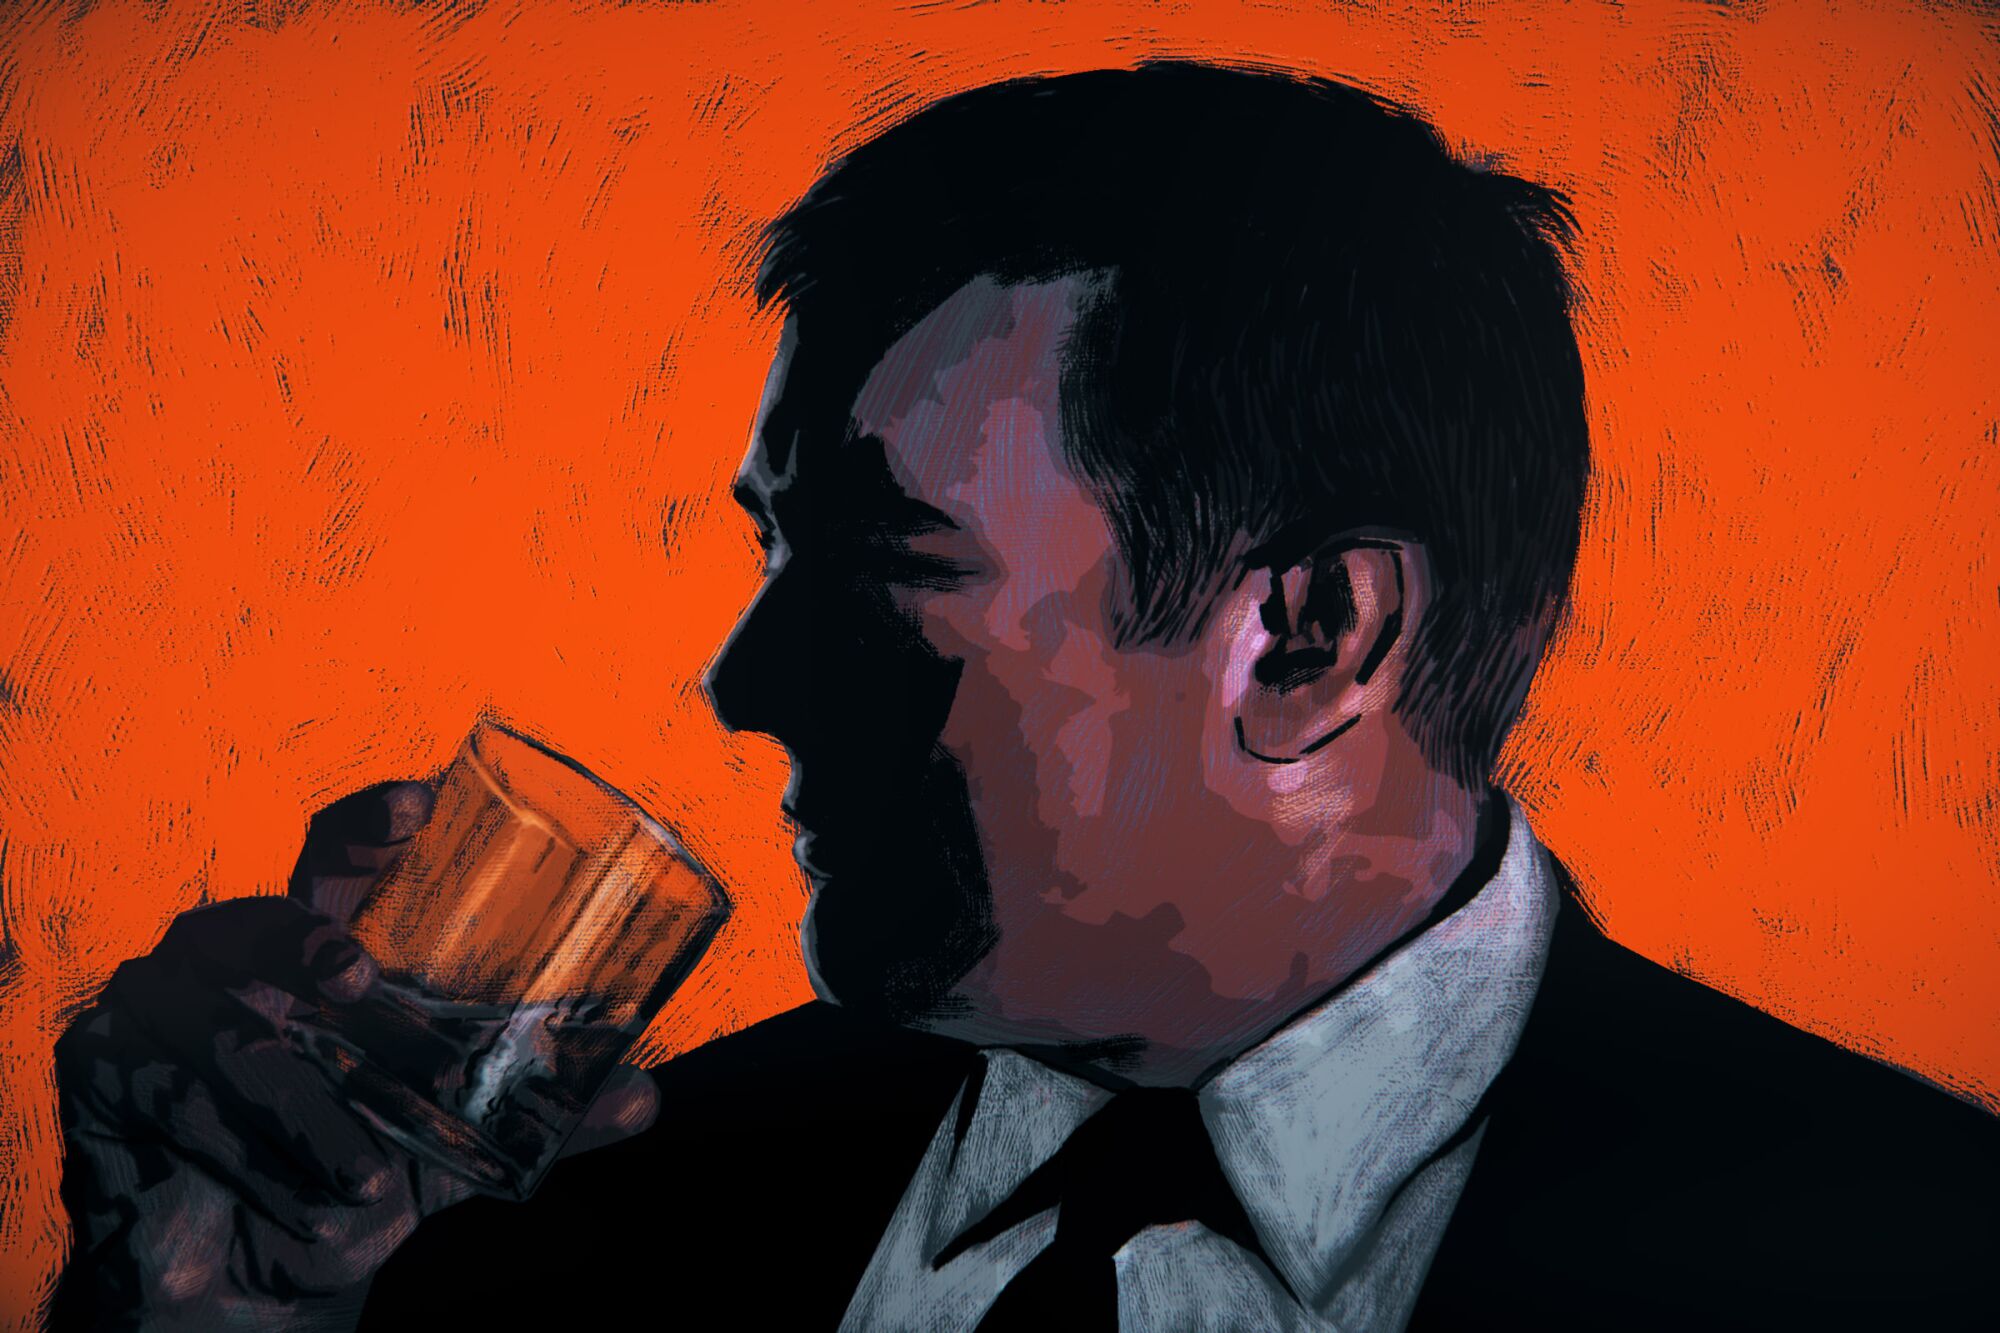 Sketch of a man in a suit drinking from a glass